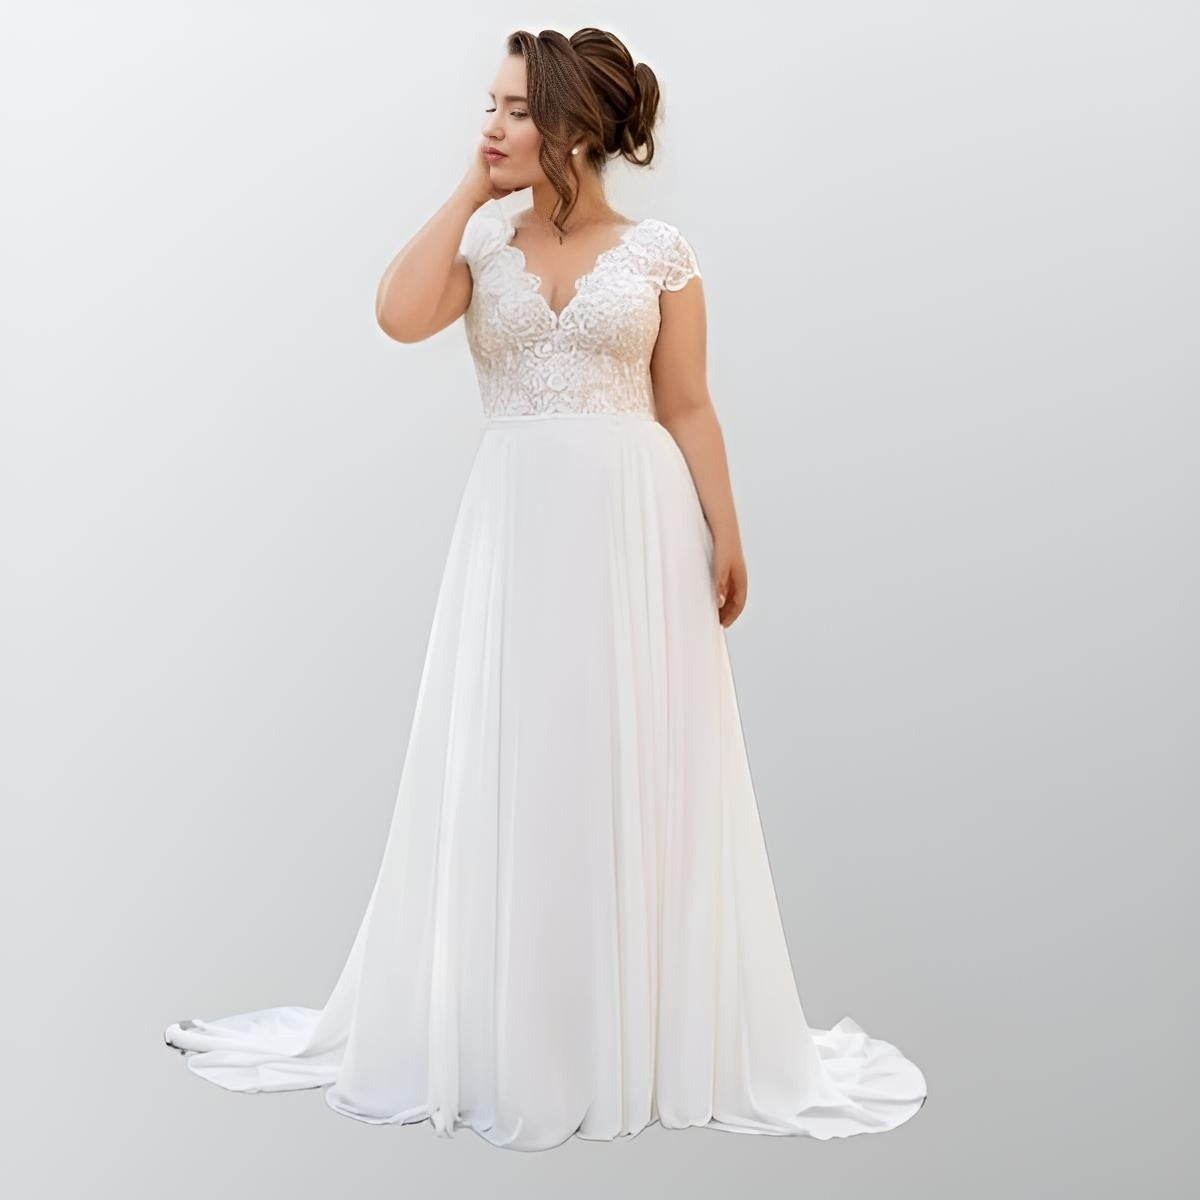 Buy Plus Size Satin Wedding Dress, a Line Satin Wedding Dress, Plus Size  Bridal Dress, Size Plus Short or Long Wedding Dress Online in India 